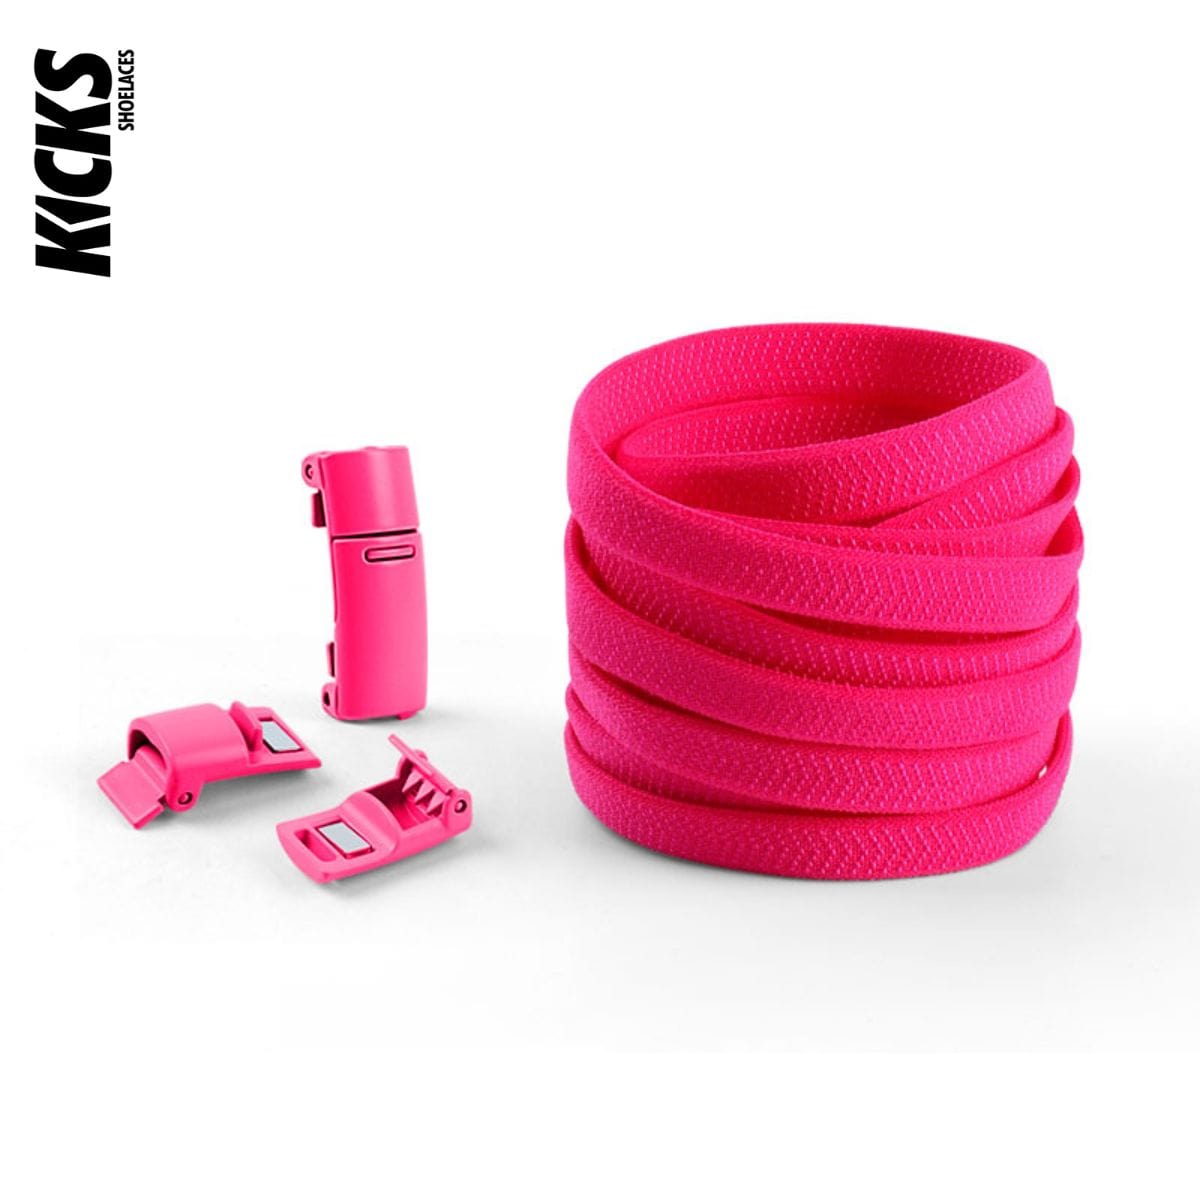 Rose Pink No-Tie Shoelaces with Magnetic Locks - Kicks Shoelaces